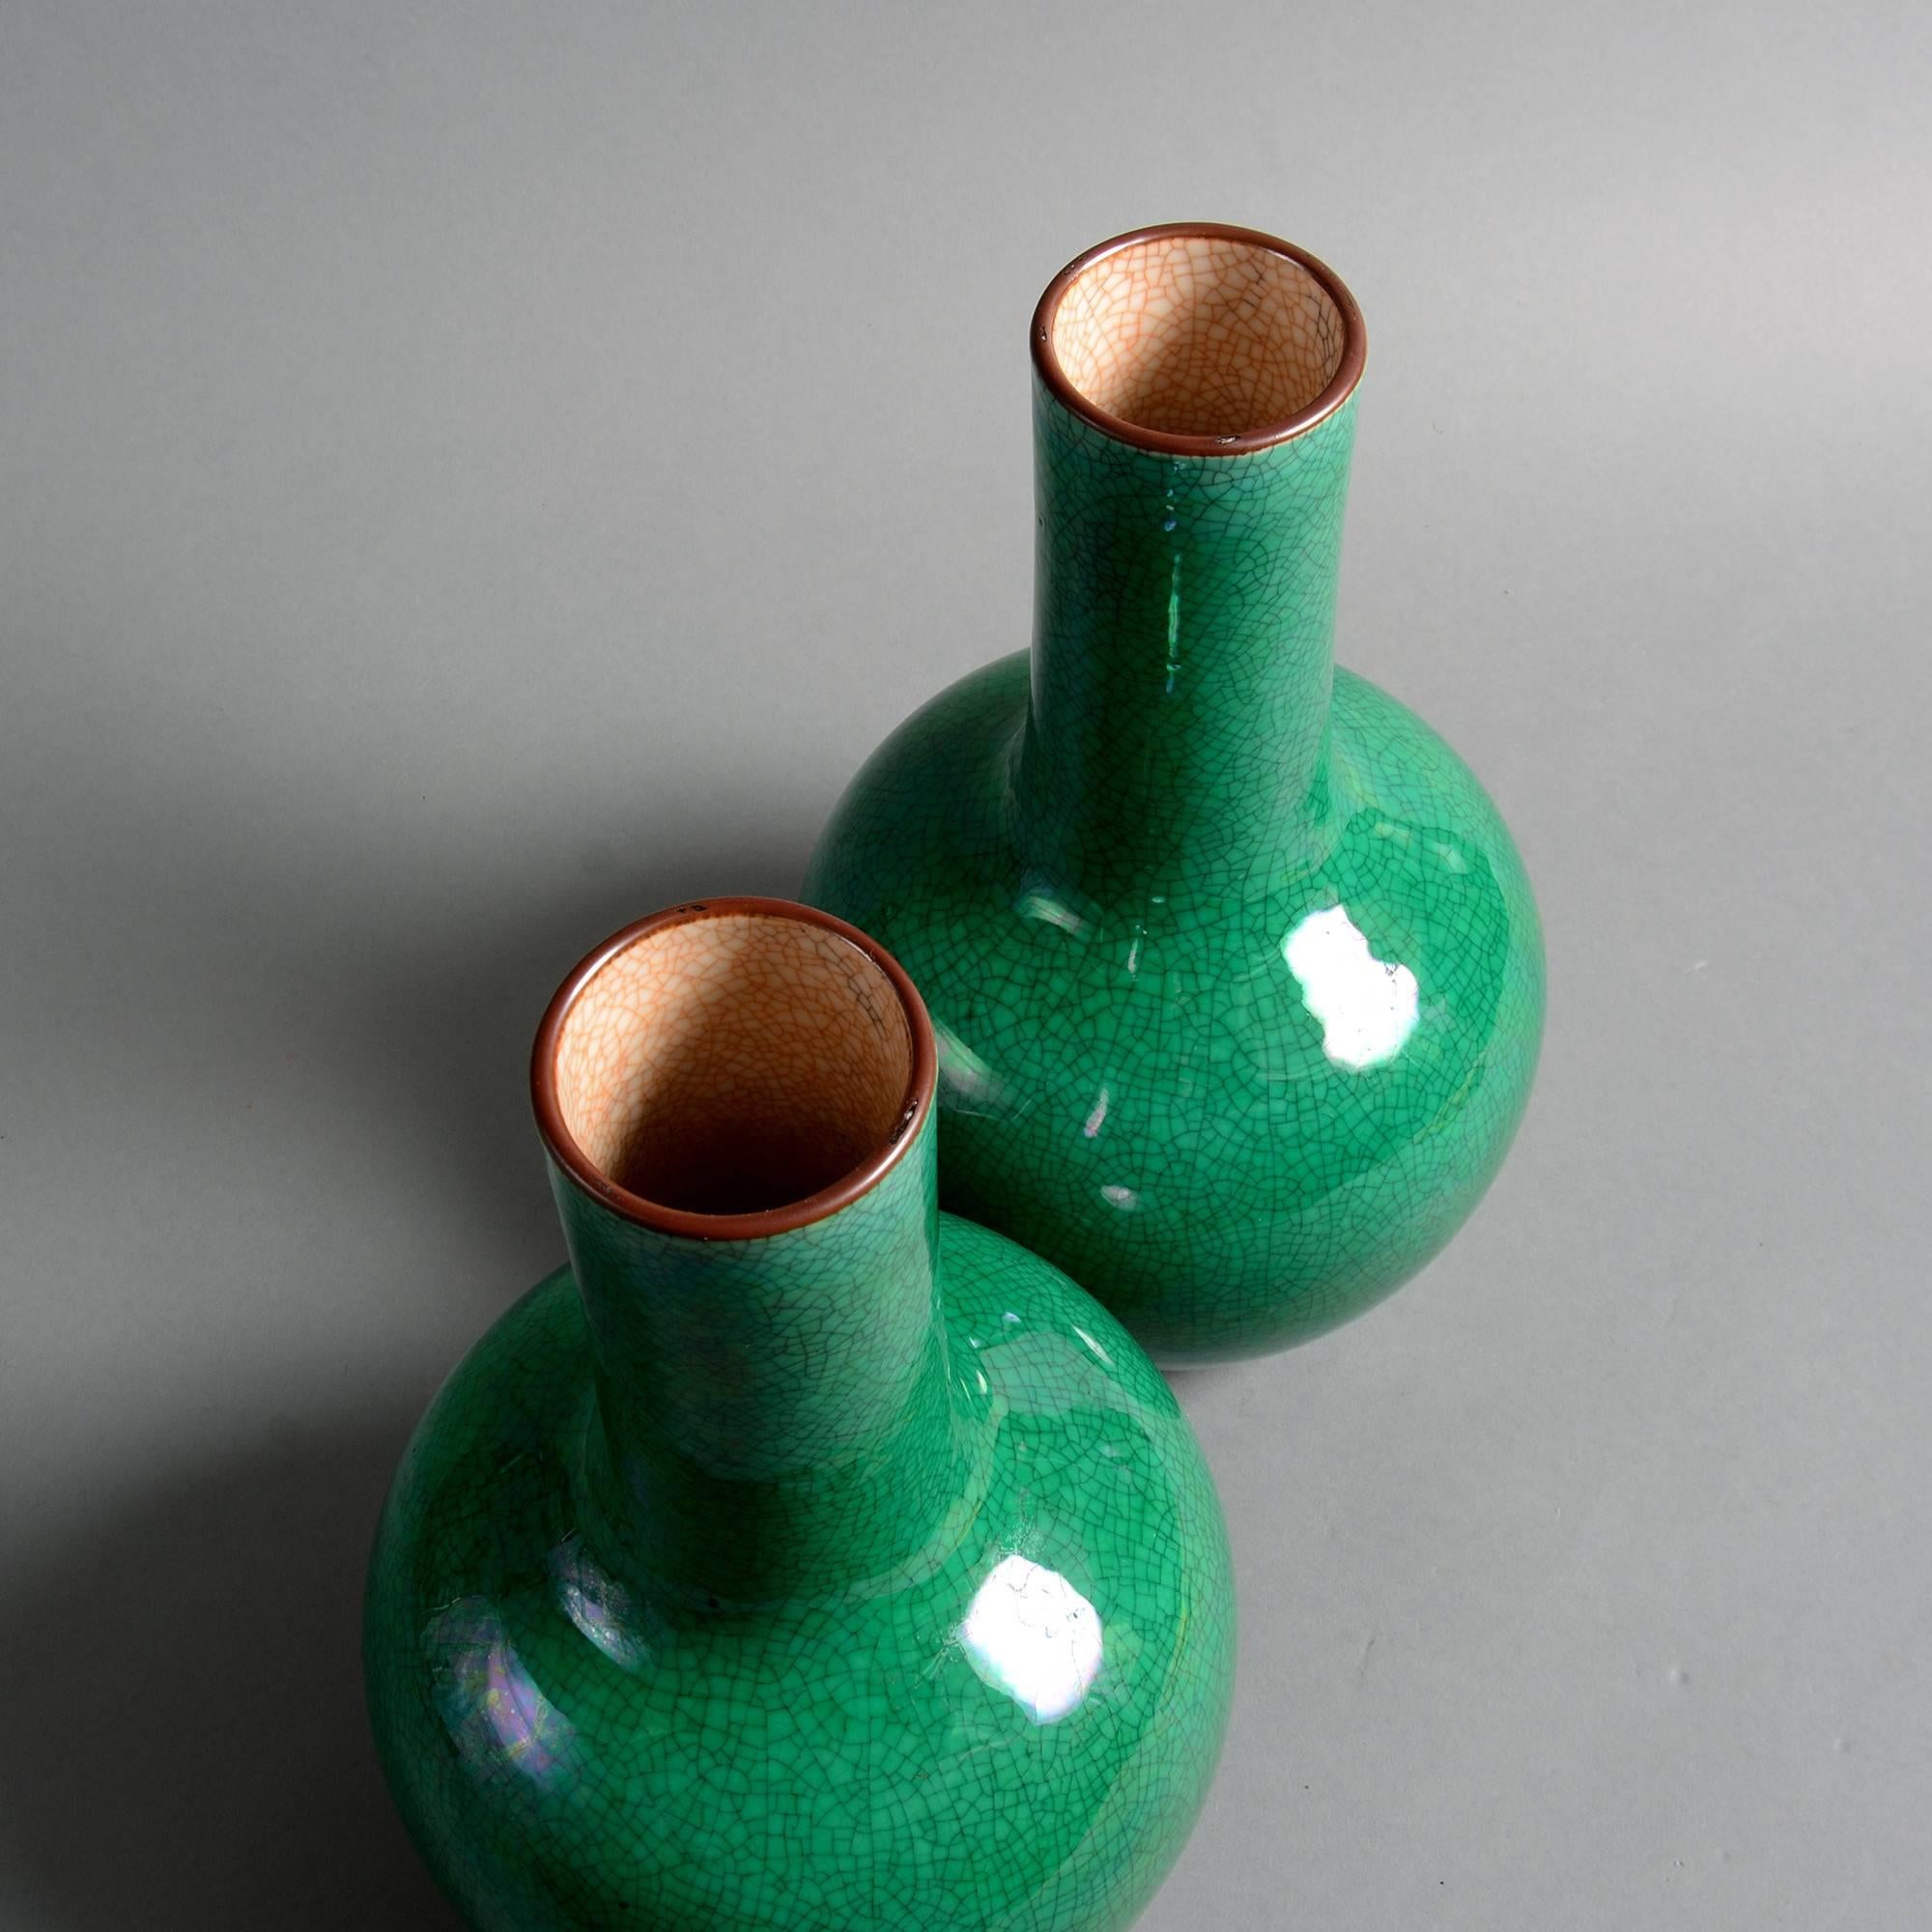 A pair of late 19th century porcelain bottle vases, with green crackle glazes. 

Qing dynasty, Guangxu period.